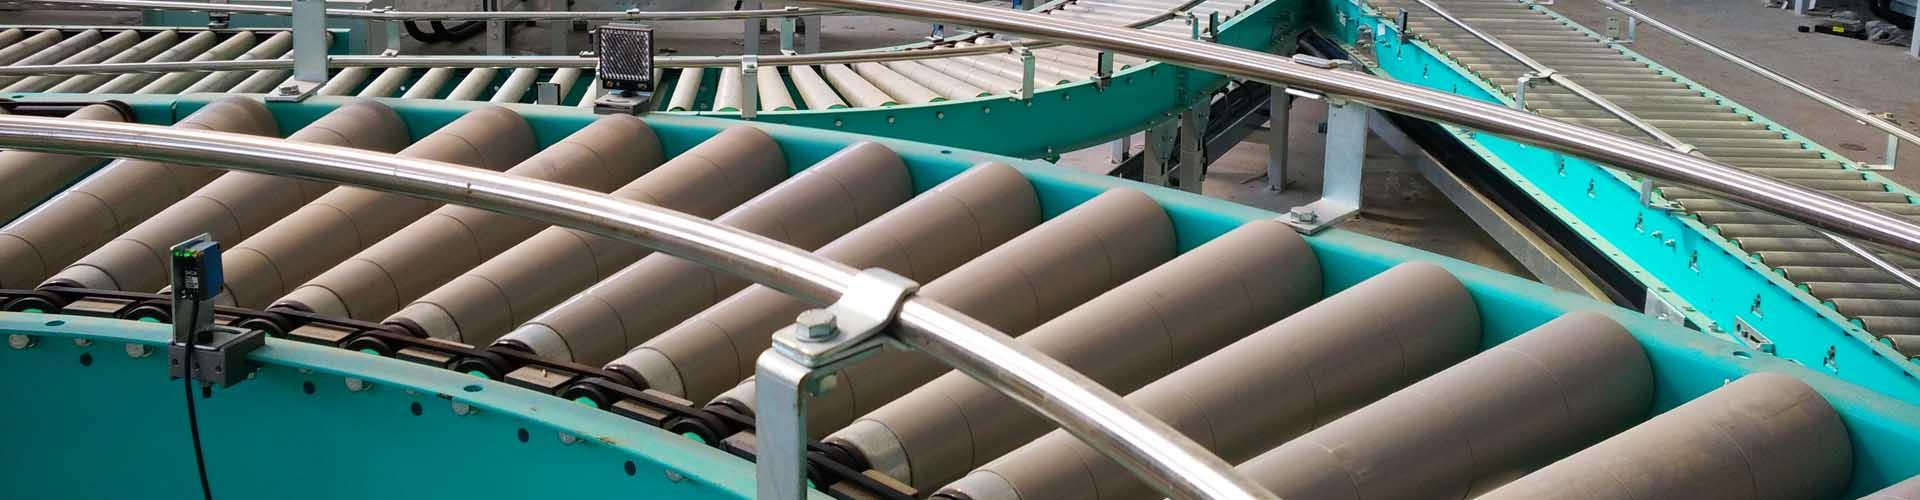 2640 Series Double Grooved Tapered Sleeve Conveyor Roller